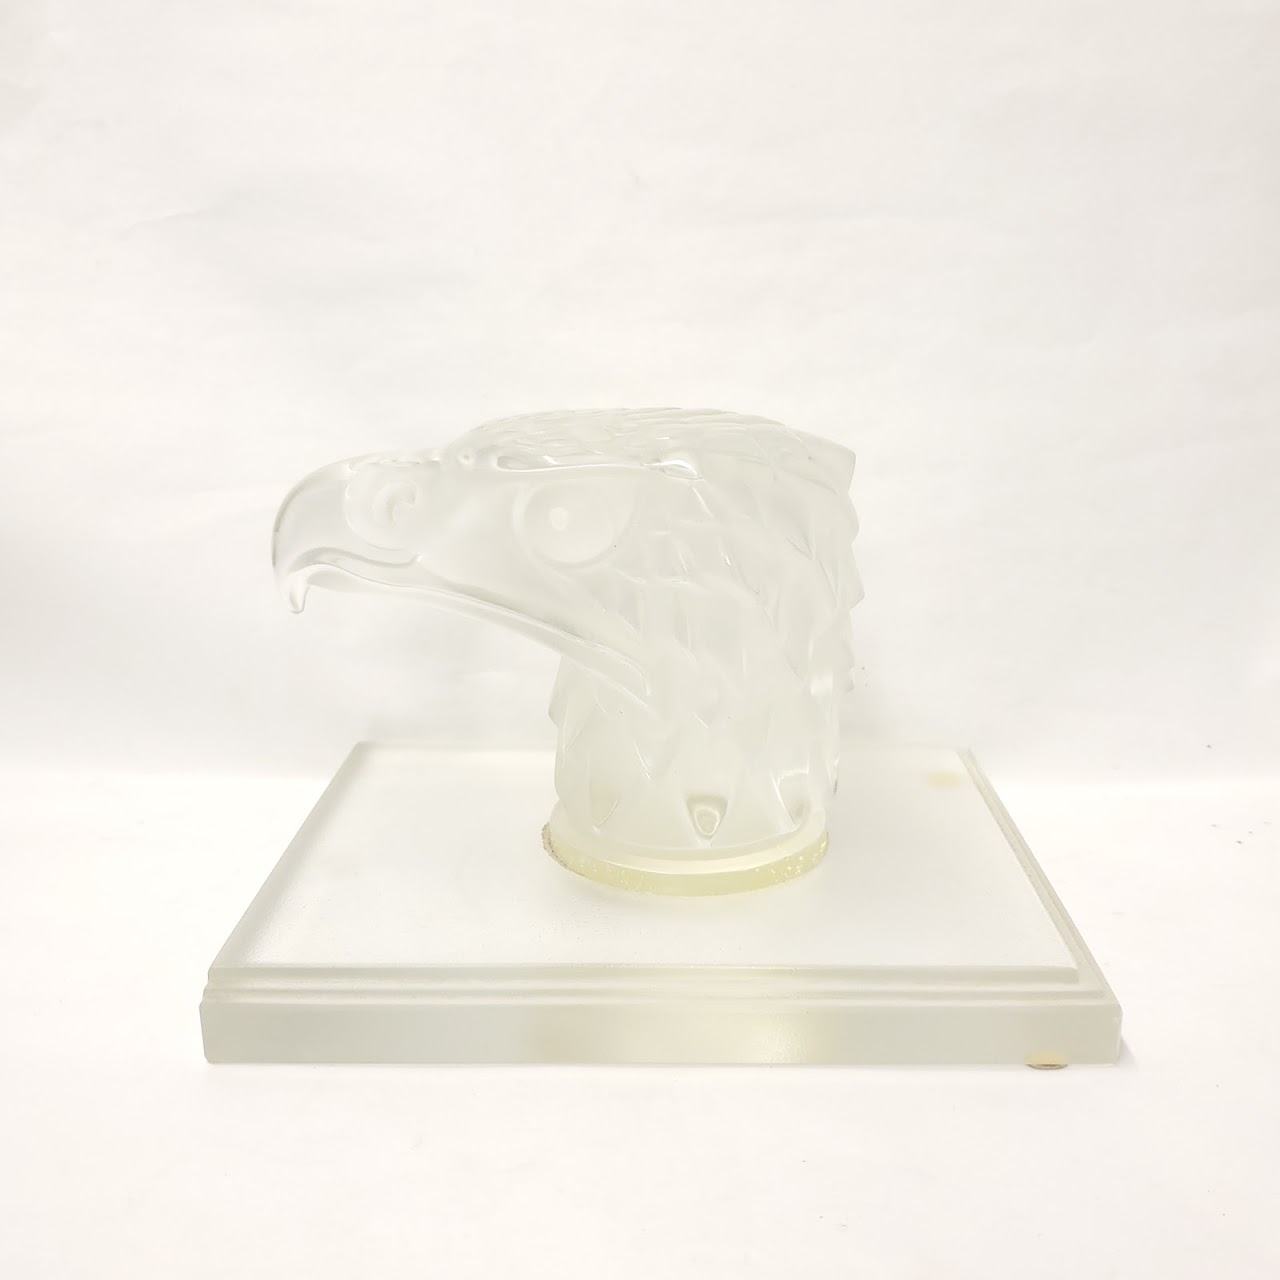 Crystal Eagle Head Bookend Pair